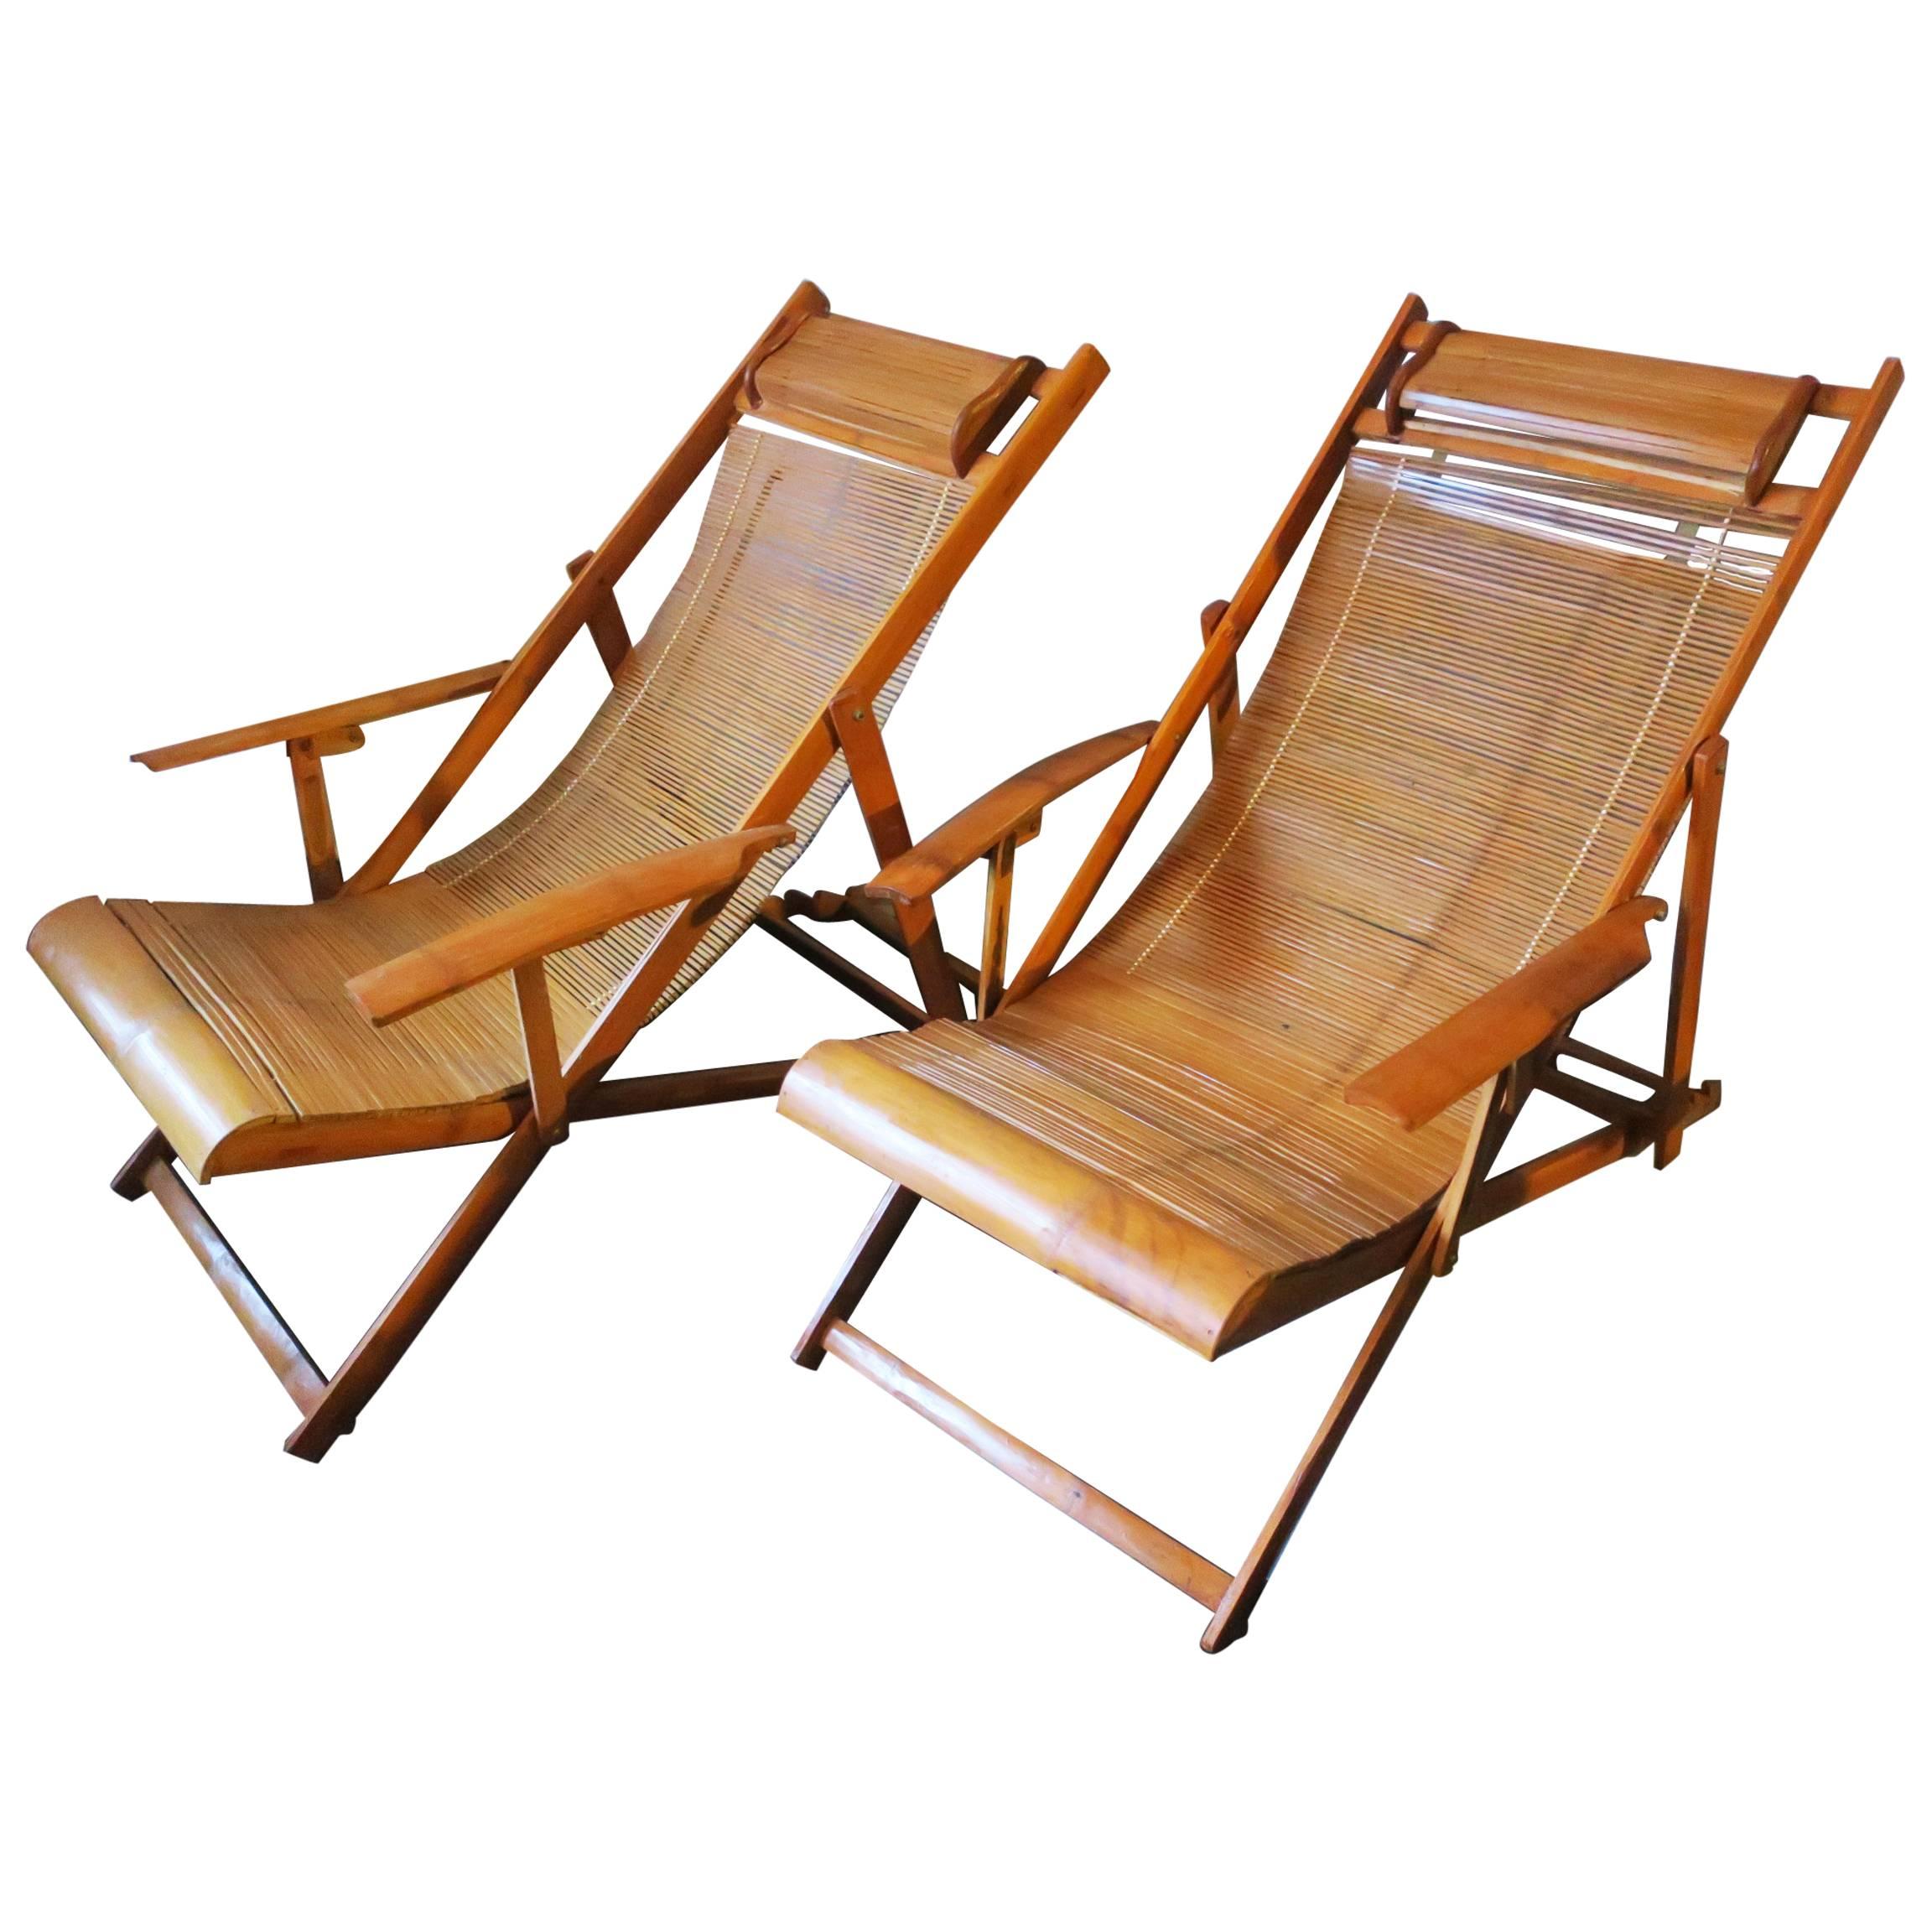 Fine Unusual Pair of Japanese Bamboo Adjustable Deck Chairs with Armrests  For Sale